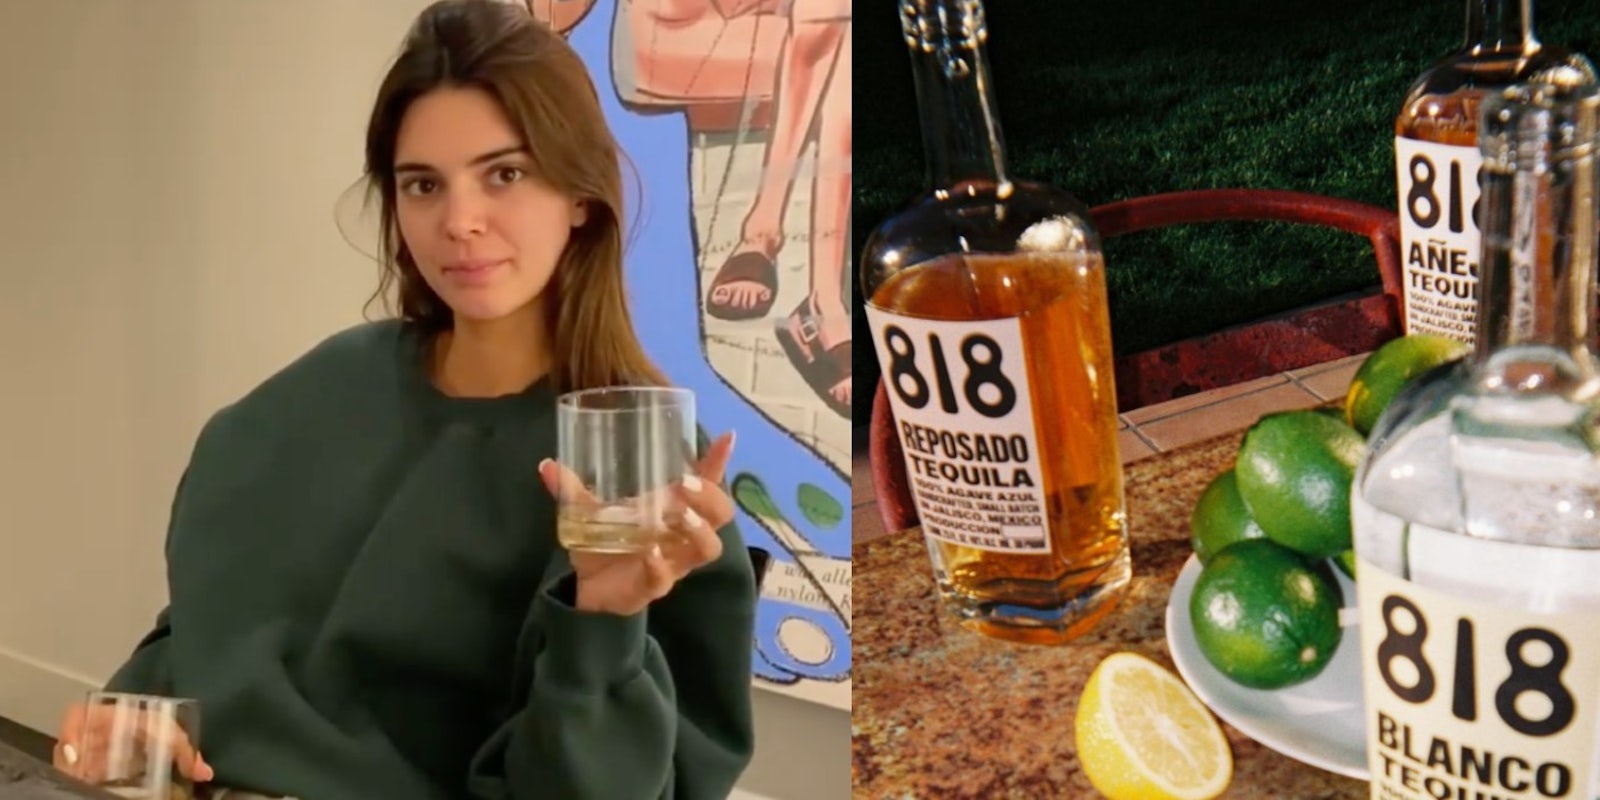 Kendall Jenner introduces her tequila brand 818